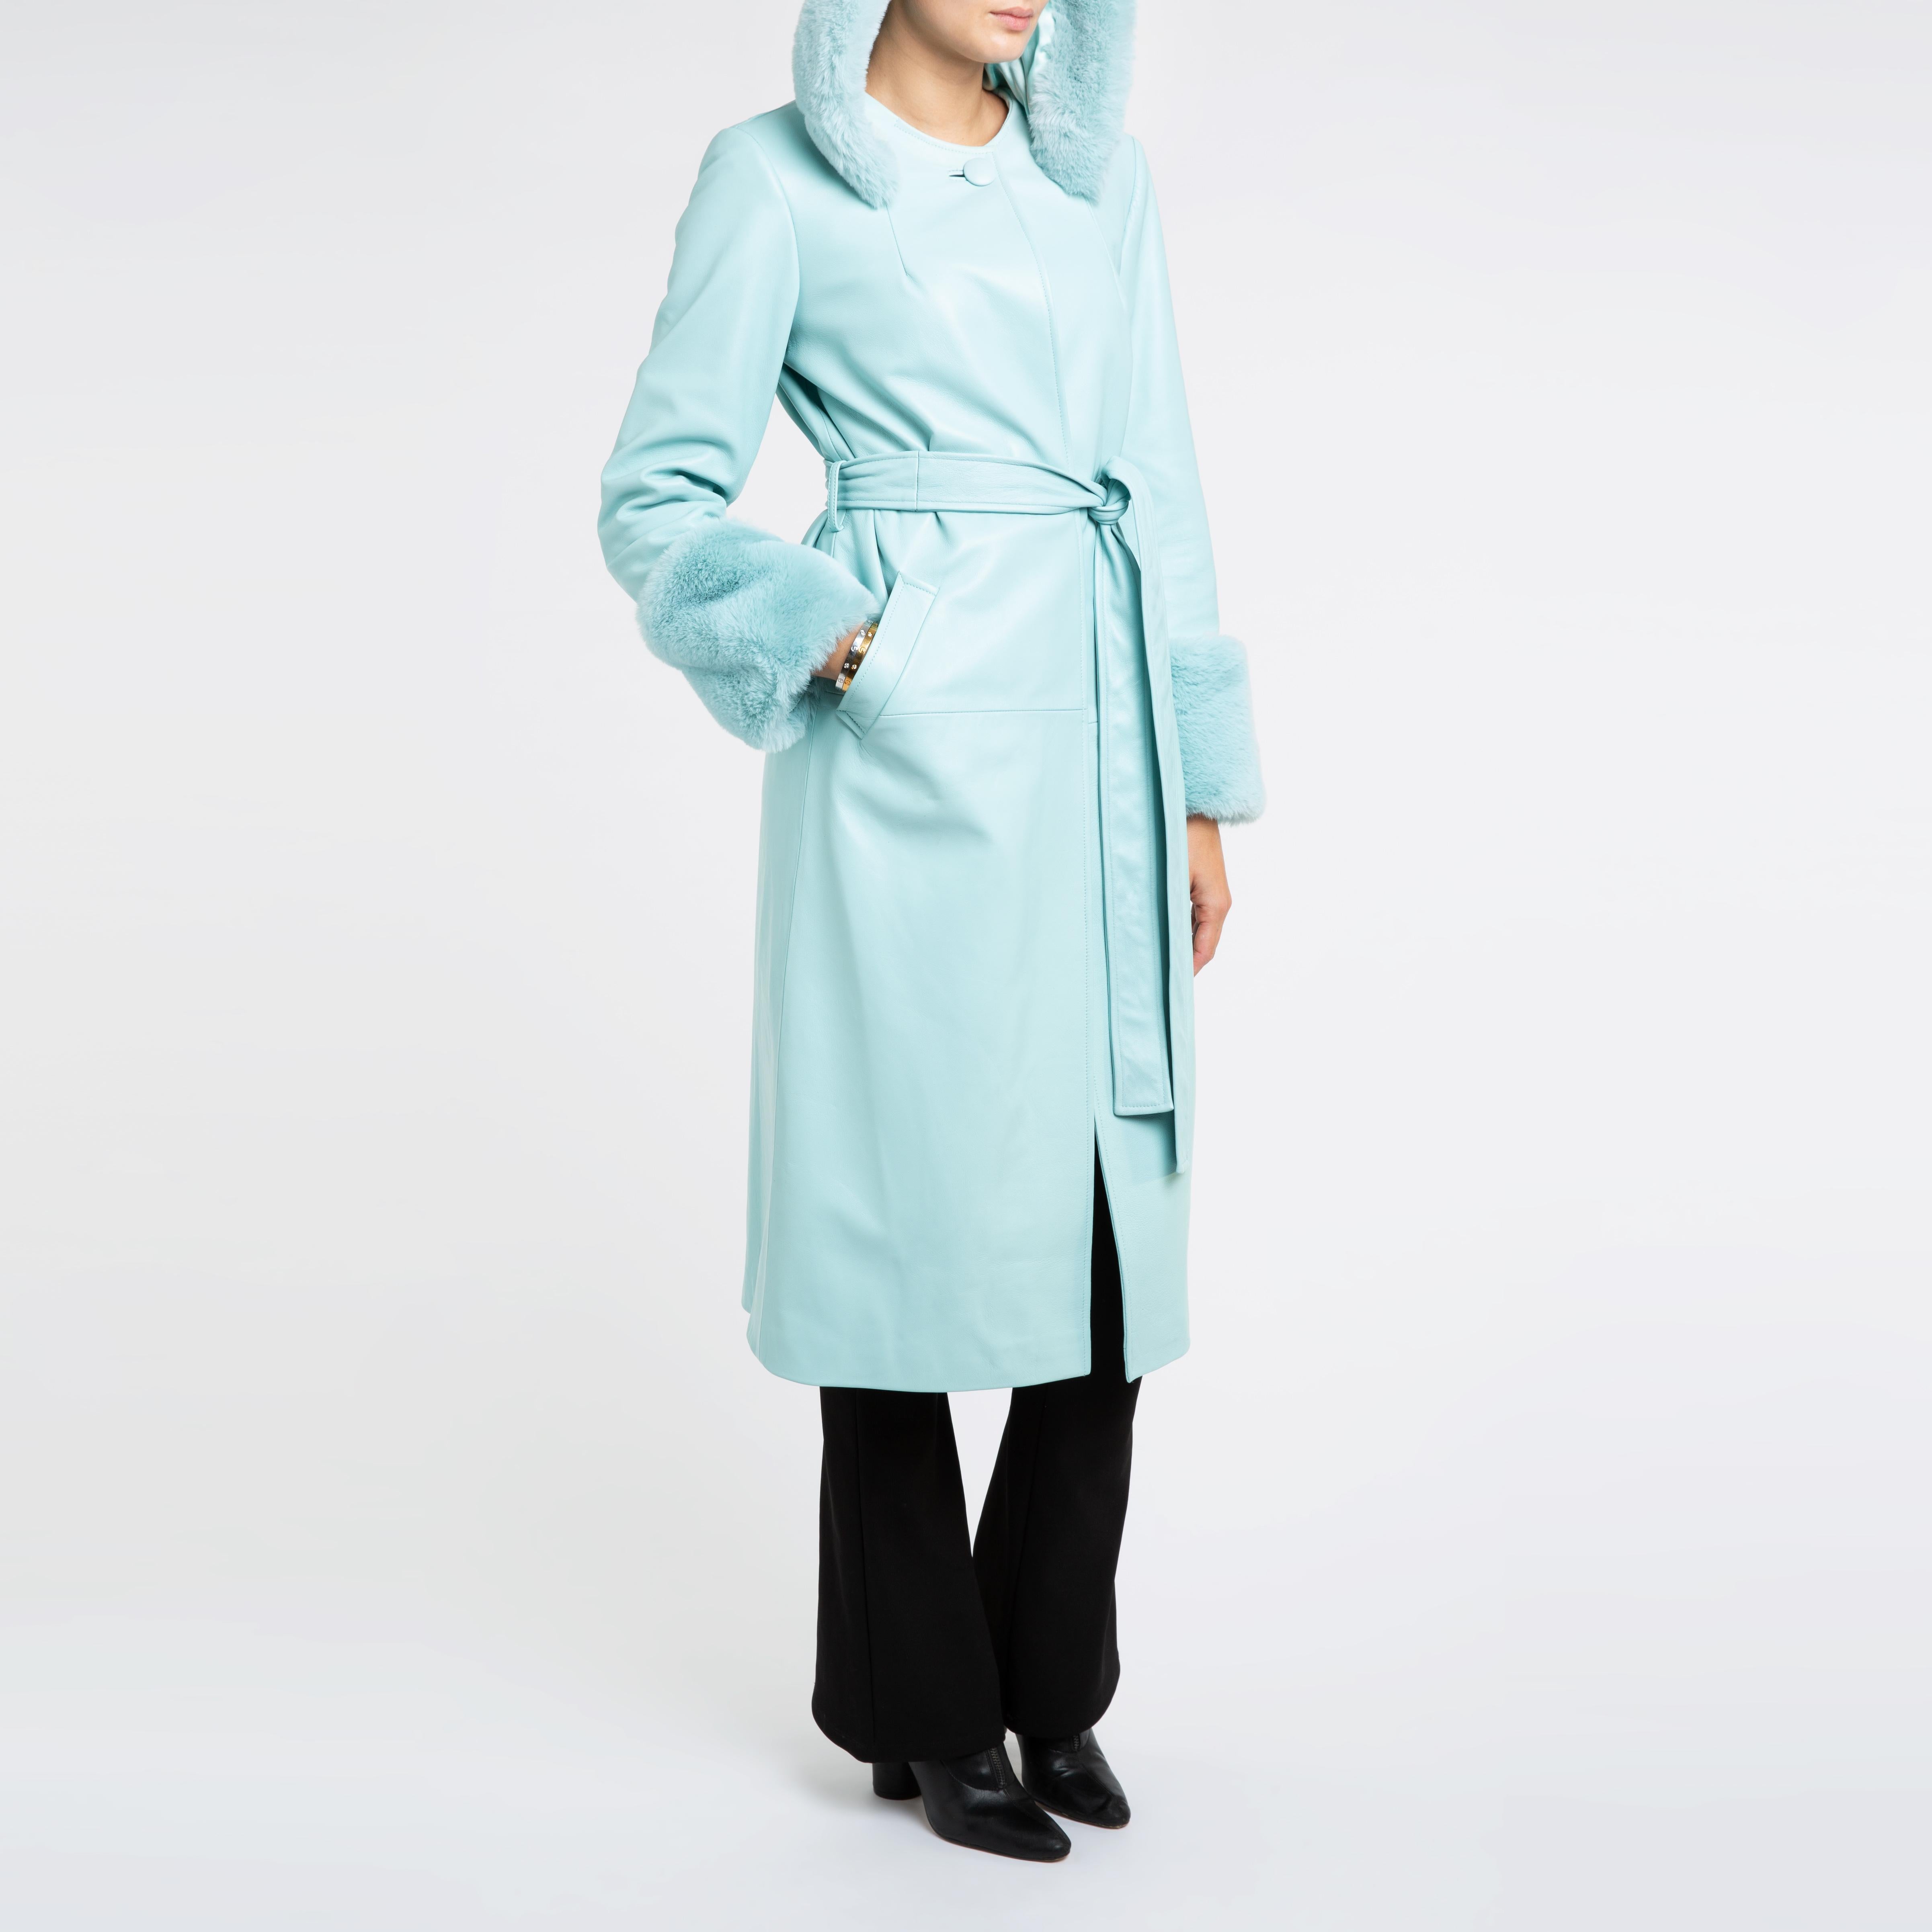 Verheyen London Hooded Leather Coat in Blue Aquamarine & Faux Fur - Size uk 14

Handmade in London, made with 100% Italian Lambs Leather and the highest quality of faux fur to match, this luxury item is an investment piece to wear for a lifetime. 